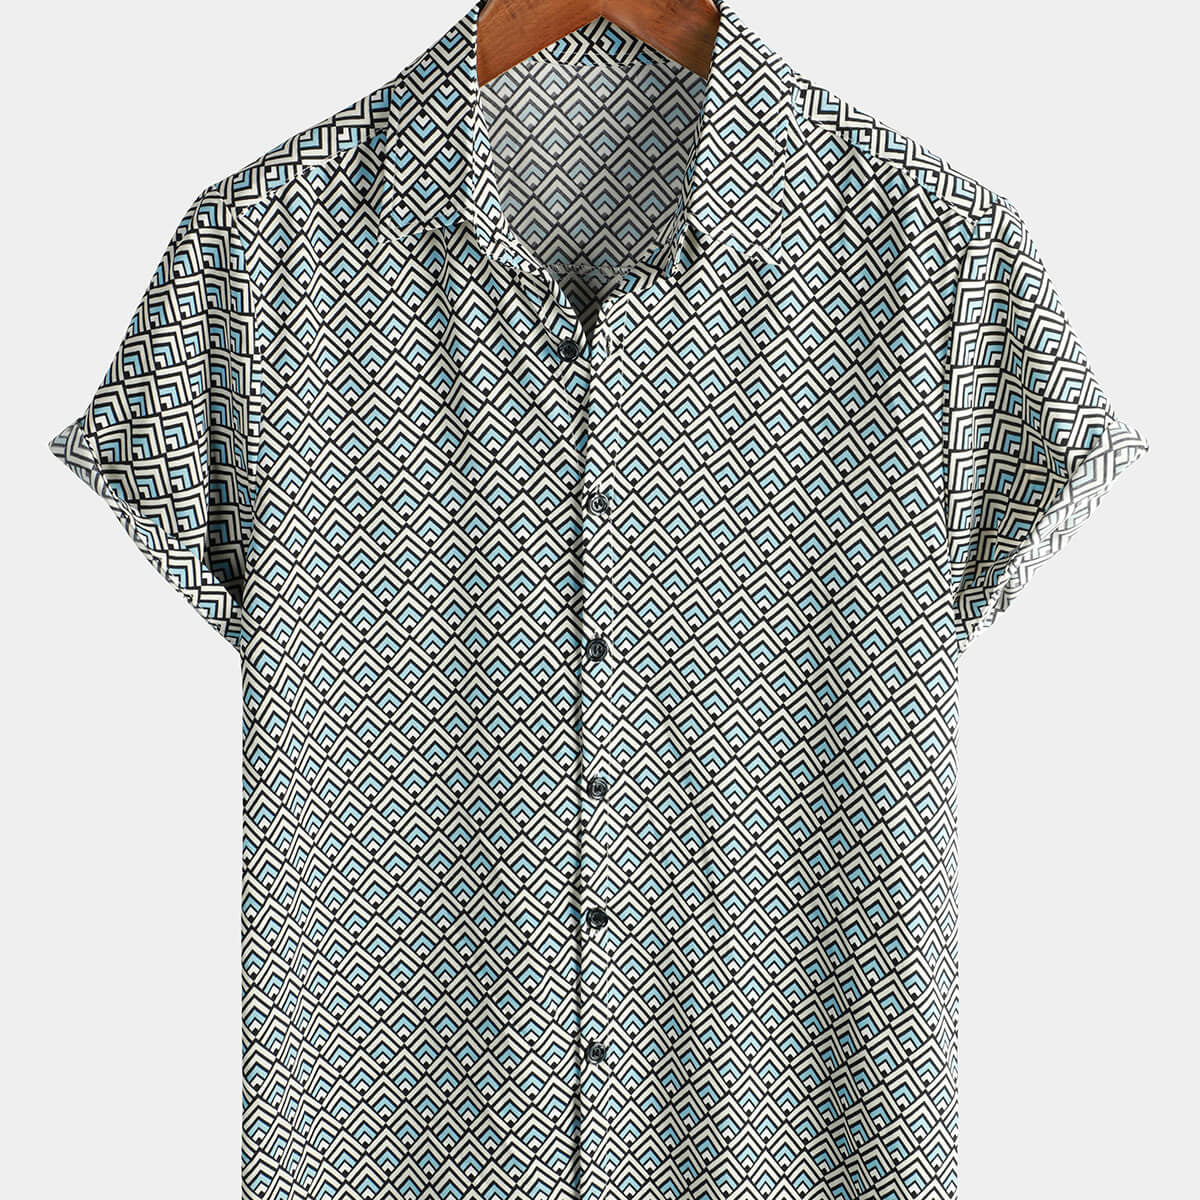 Men's Casual Vintage Geometric Button Up Holiday Summer Retro Short Sleeve Shirt